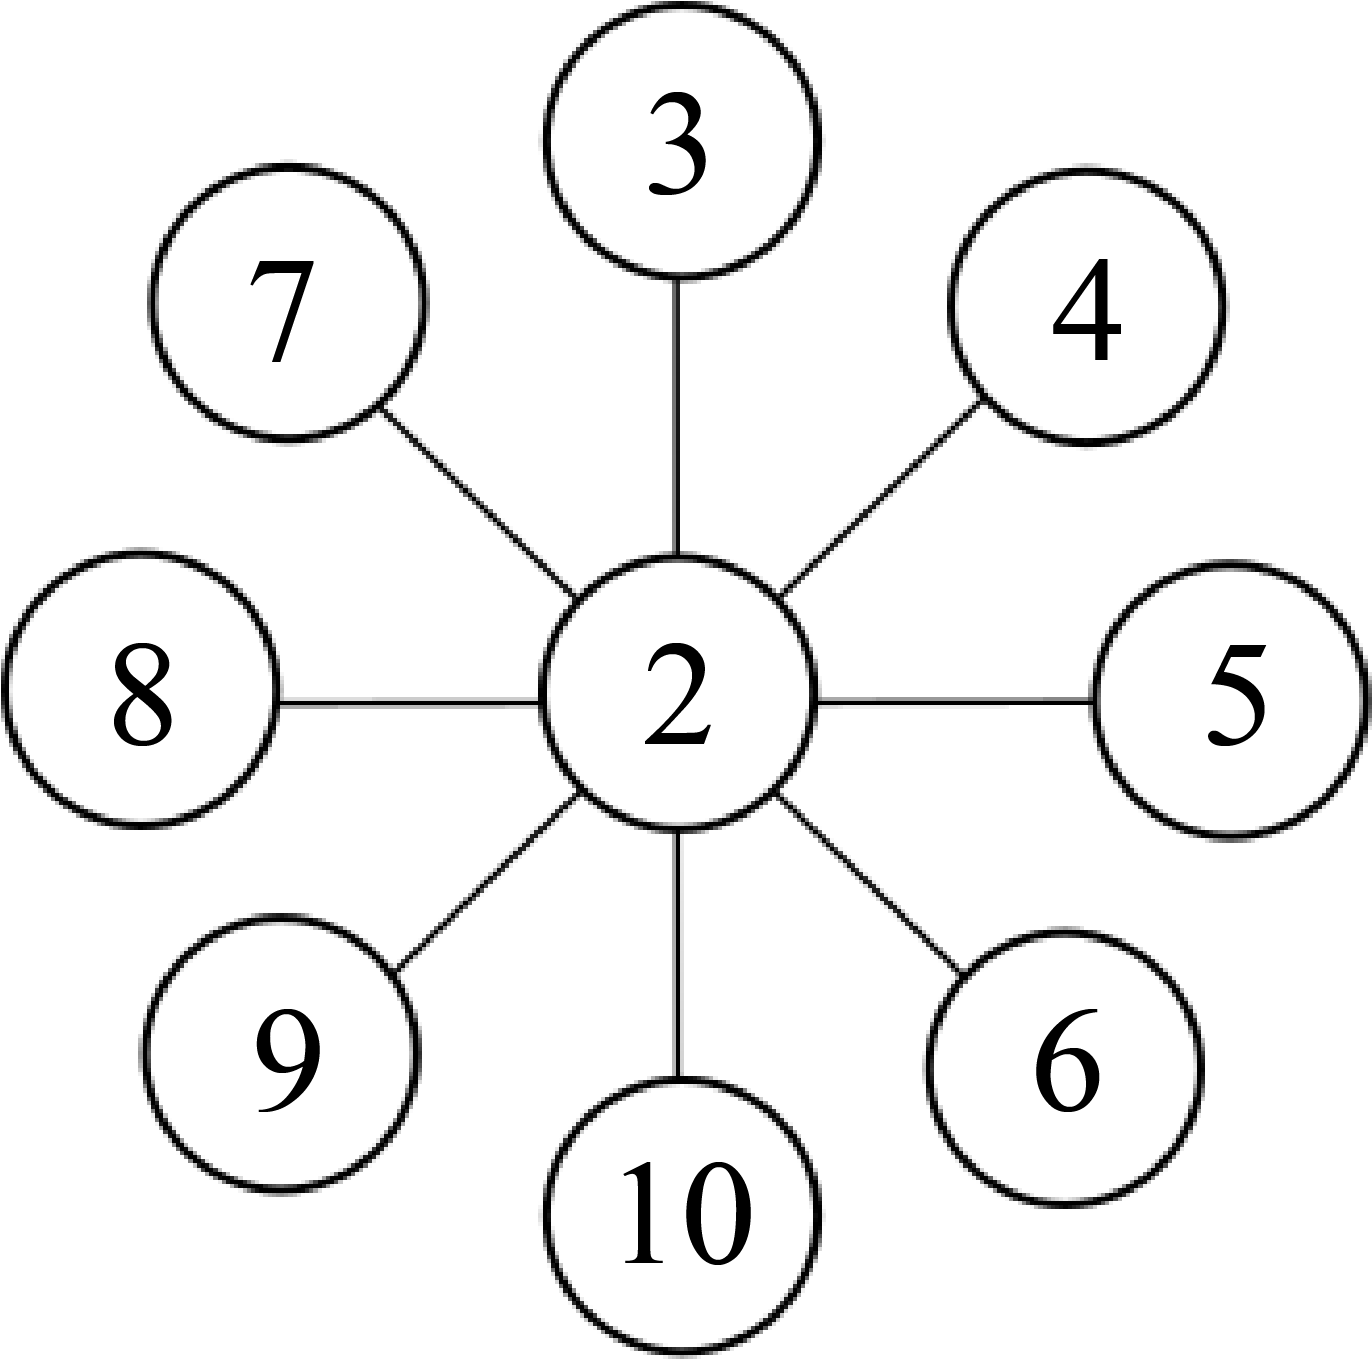 2 is the middle number. The pairs of numbers placed on the same line are 3 and 10, 4 and 9, 5 and 8, 6 and 7.